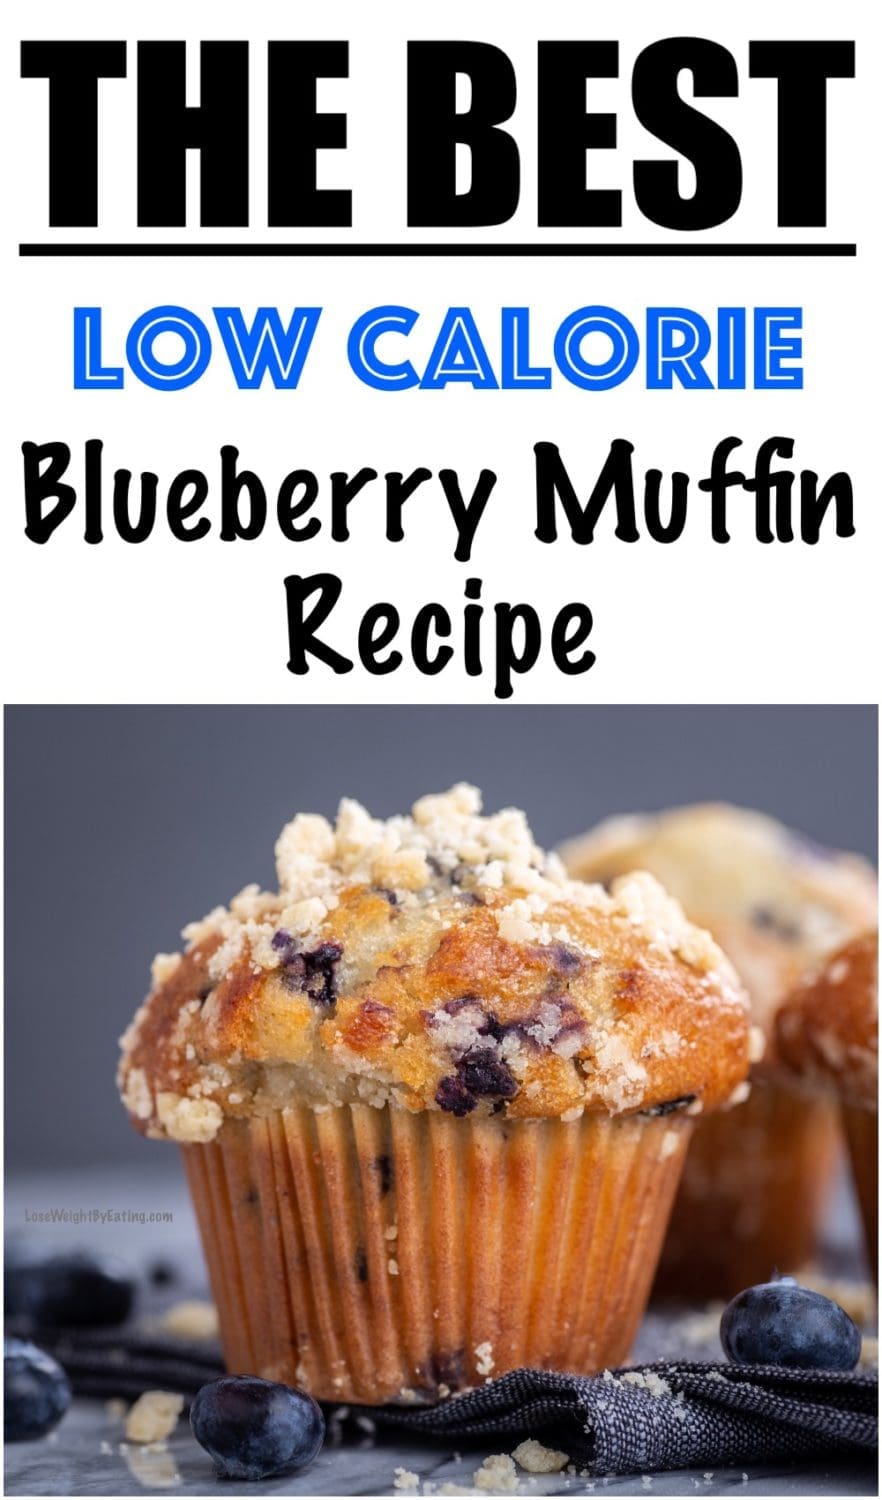 The Best Blueberry Muffin Recipe